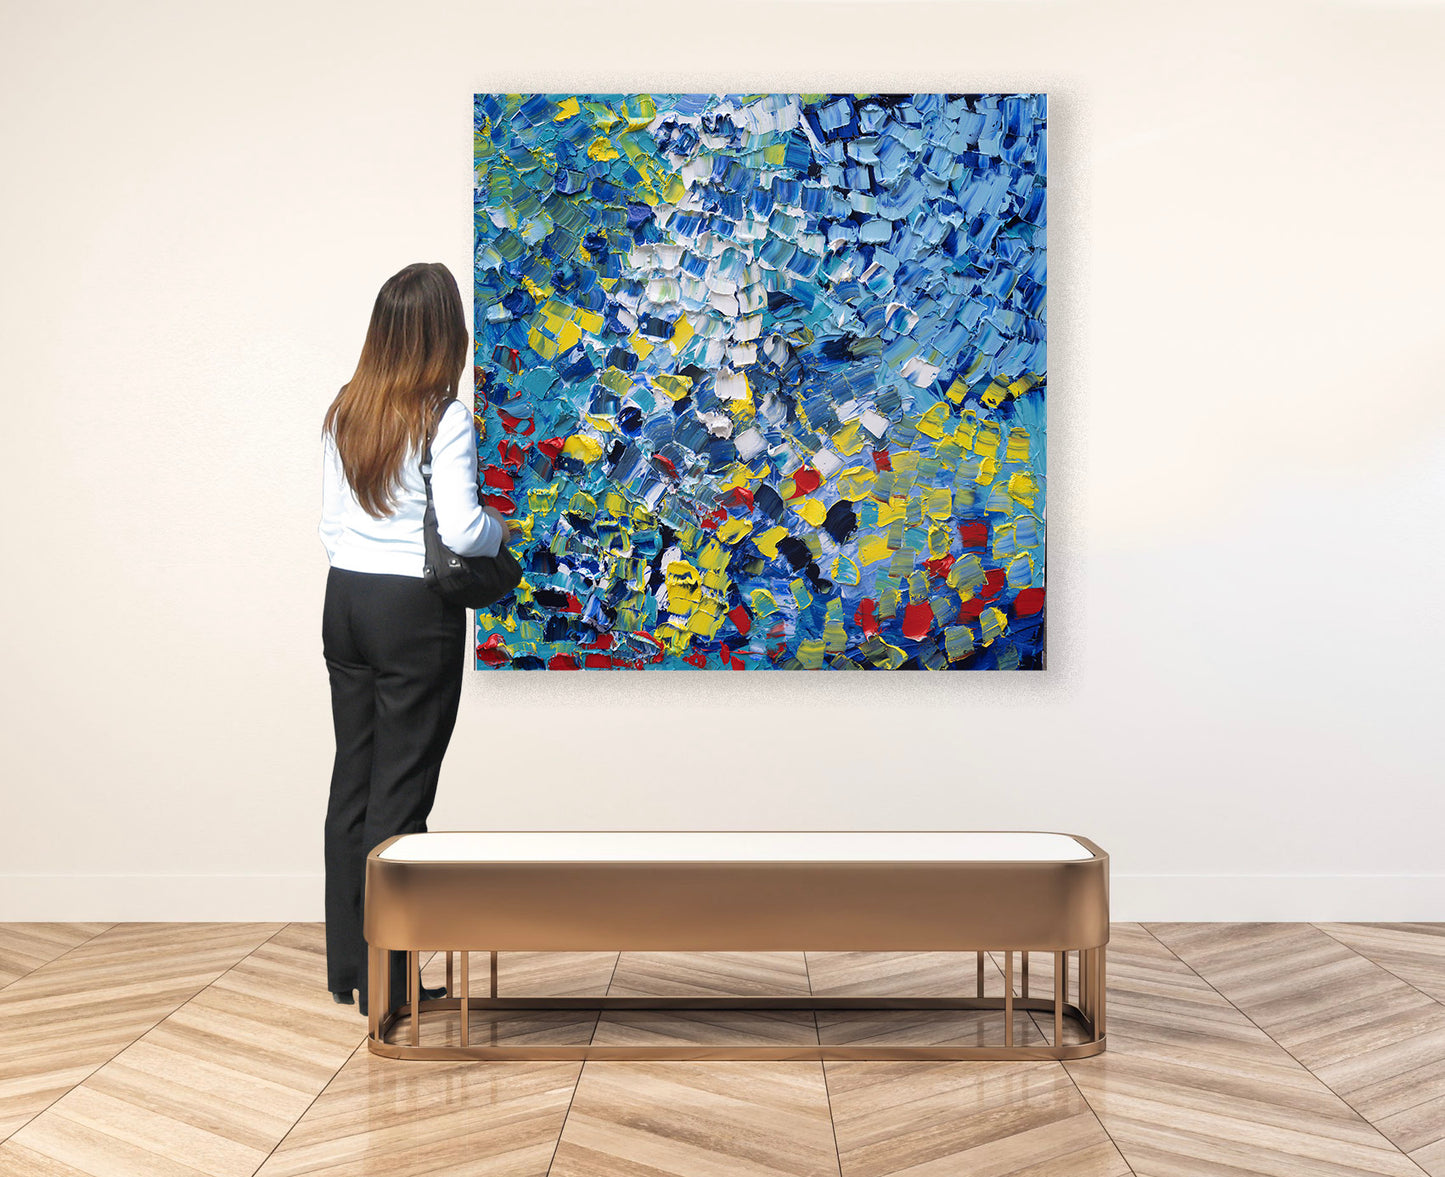 Symphony 6, 42”x42” Oil On Canvas, Sold 2022